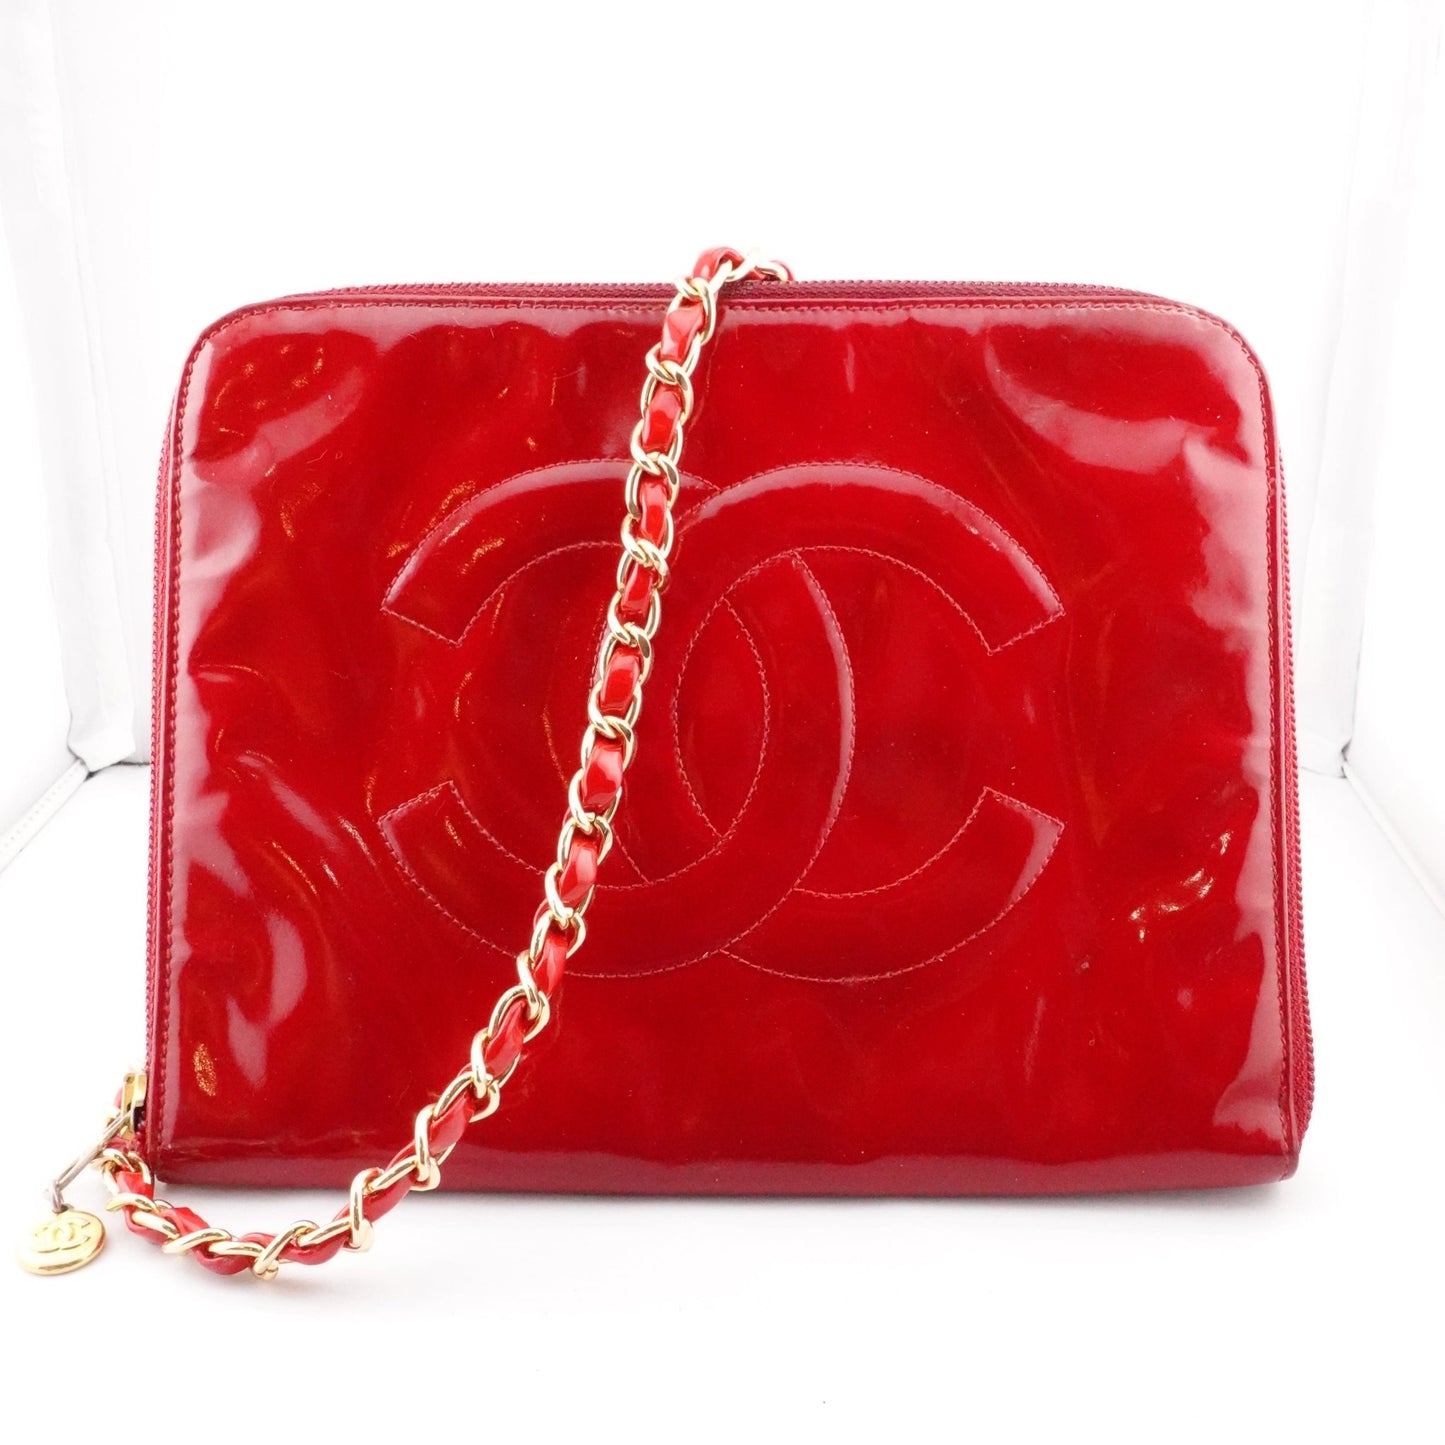 CHANEL Patent Leather Timeless Zip Organizer on Chain - Bag Envy